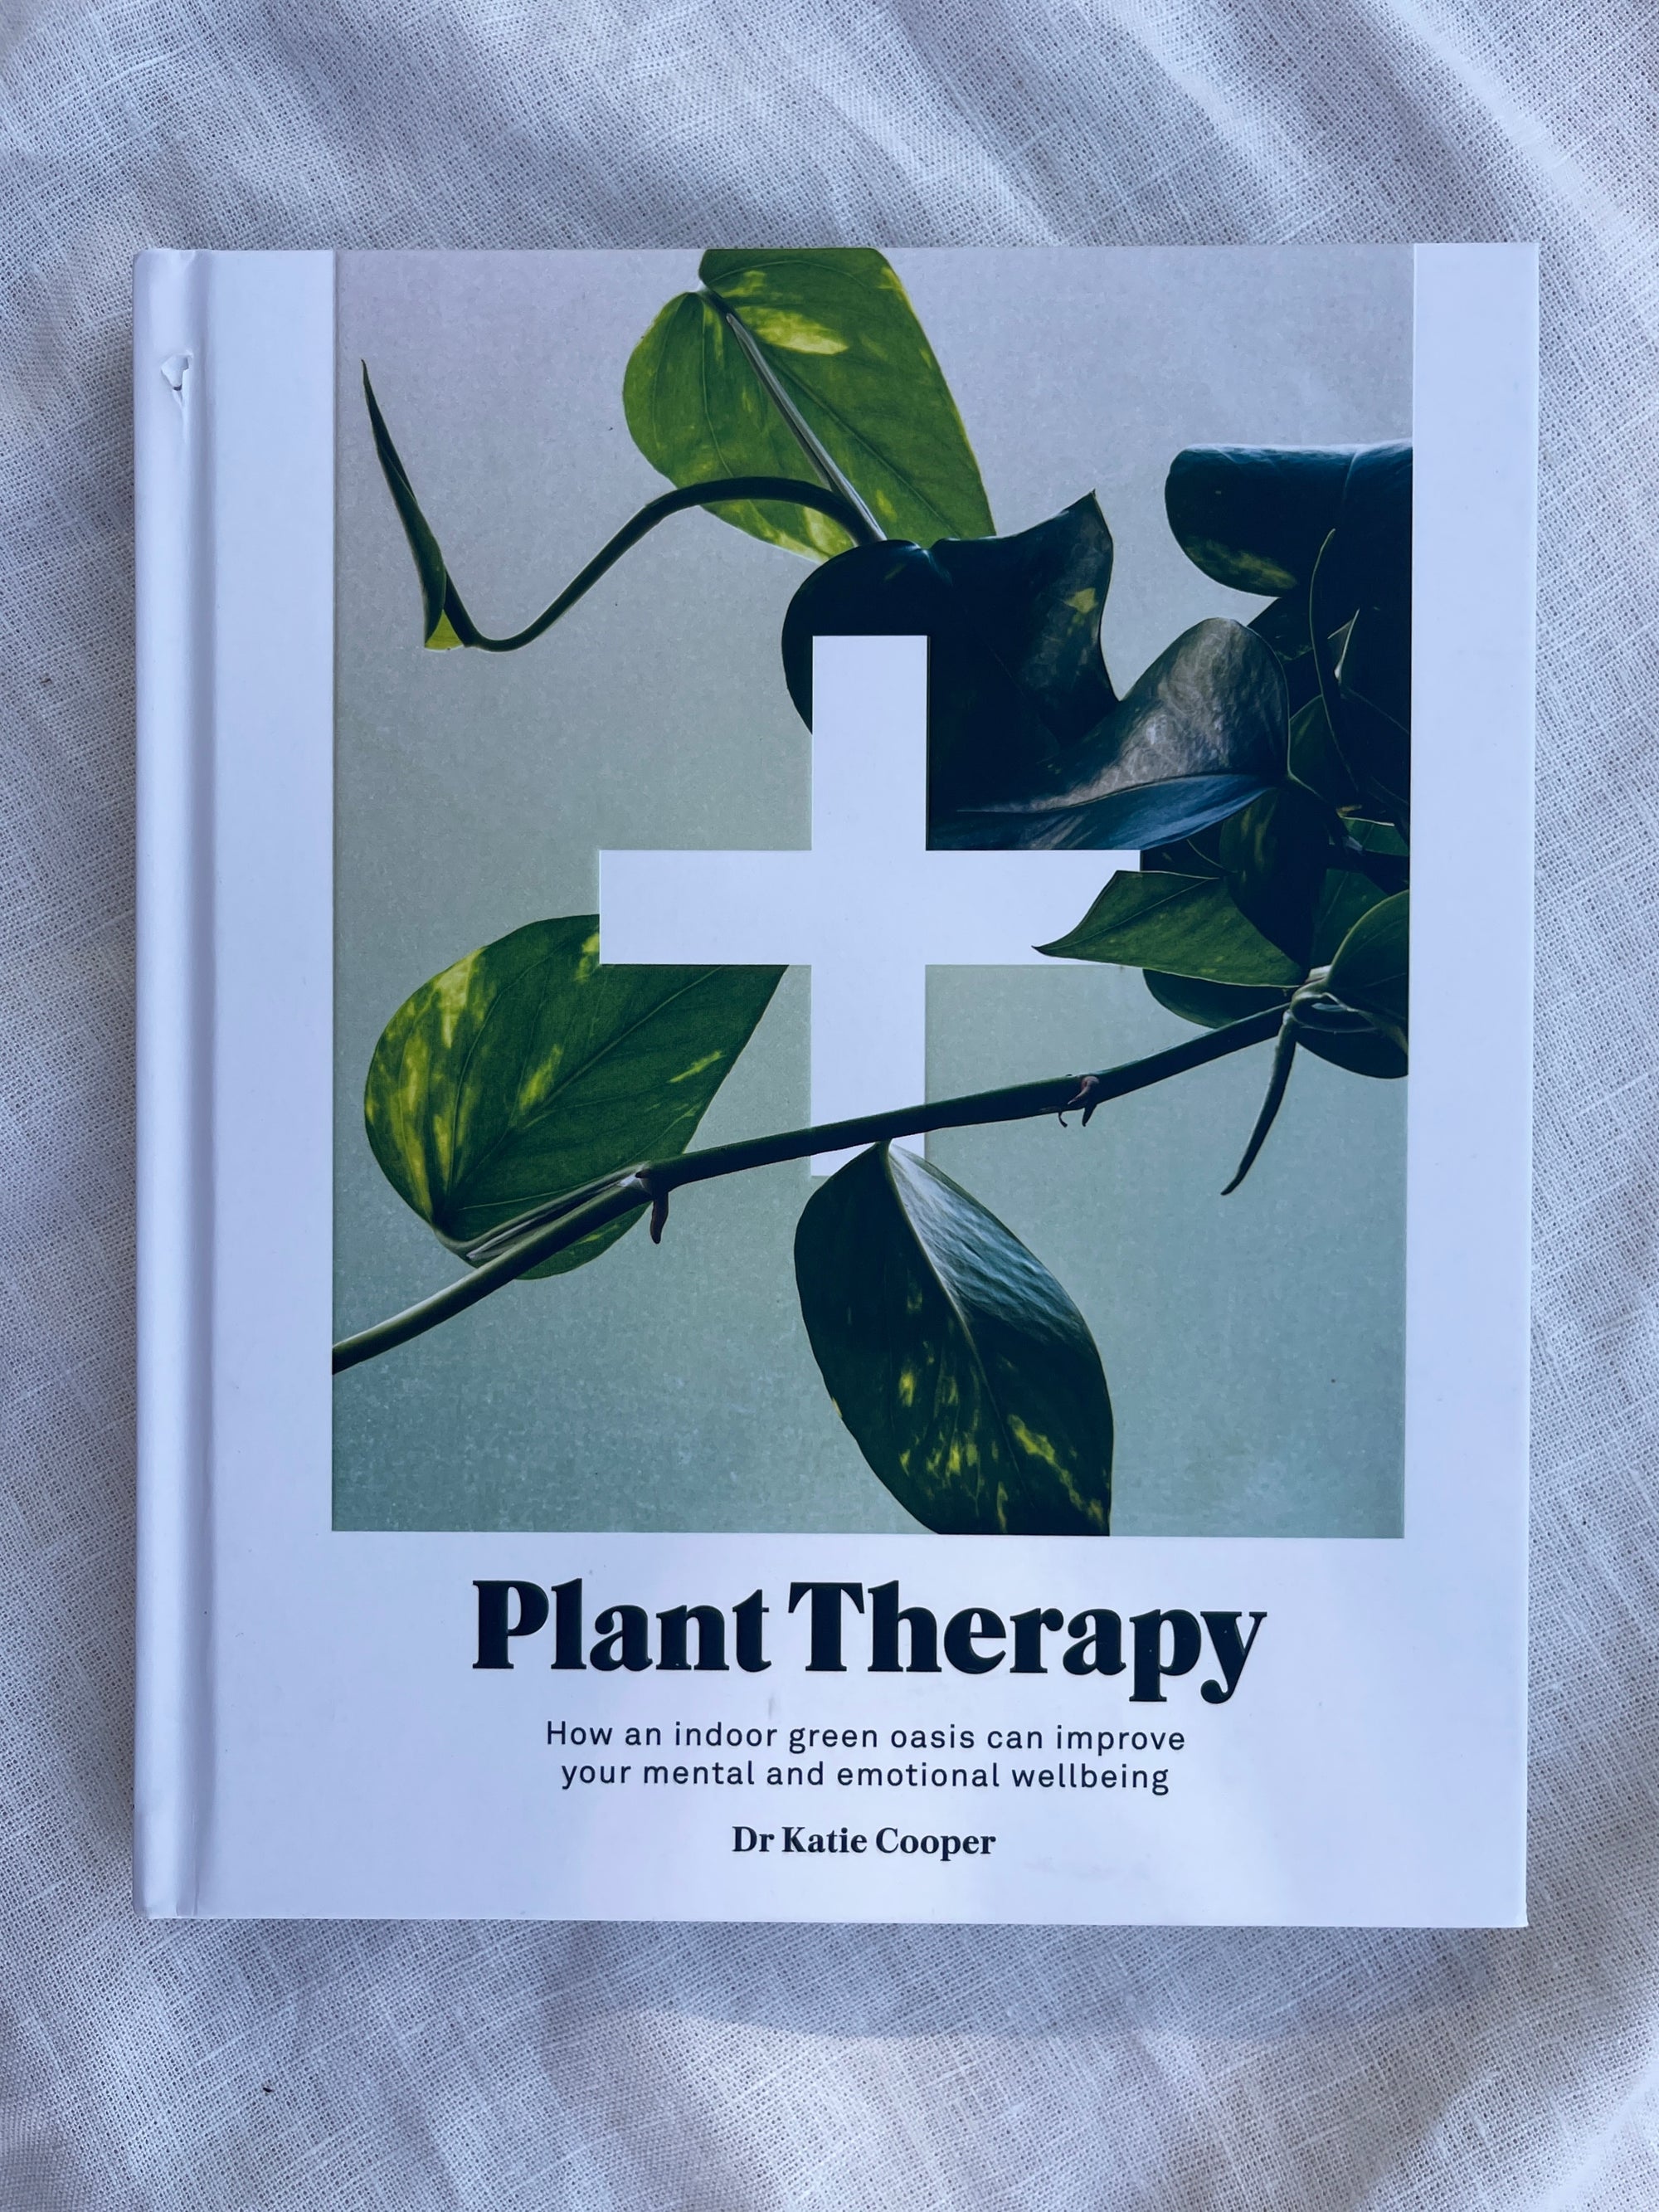 Plant Therapy book how an indoor green oasis can improve your mental and emotional wellbeing by dr katie cooper